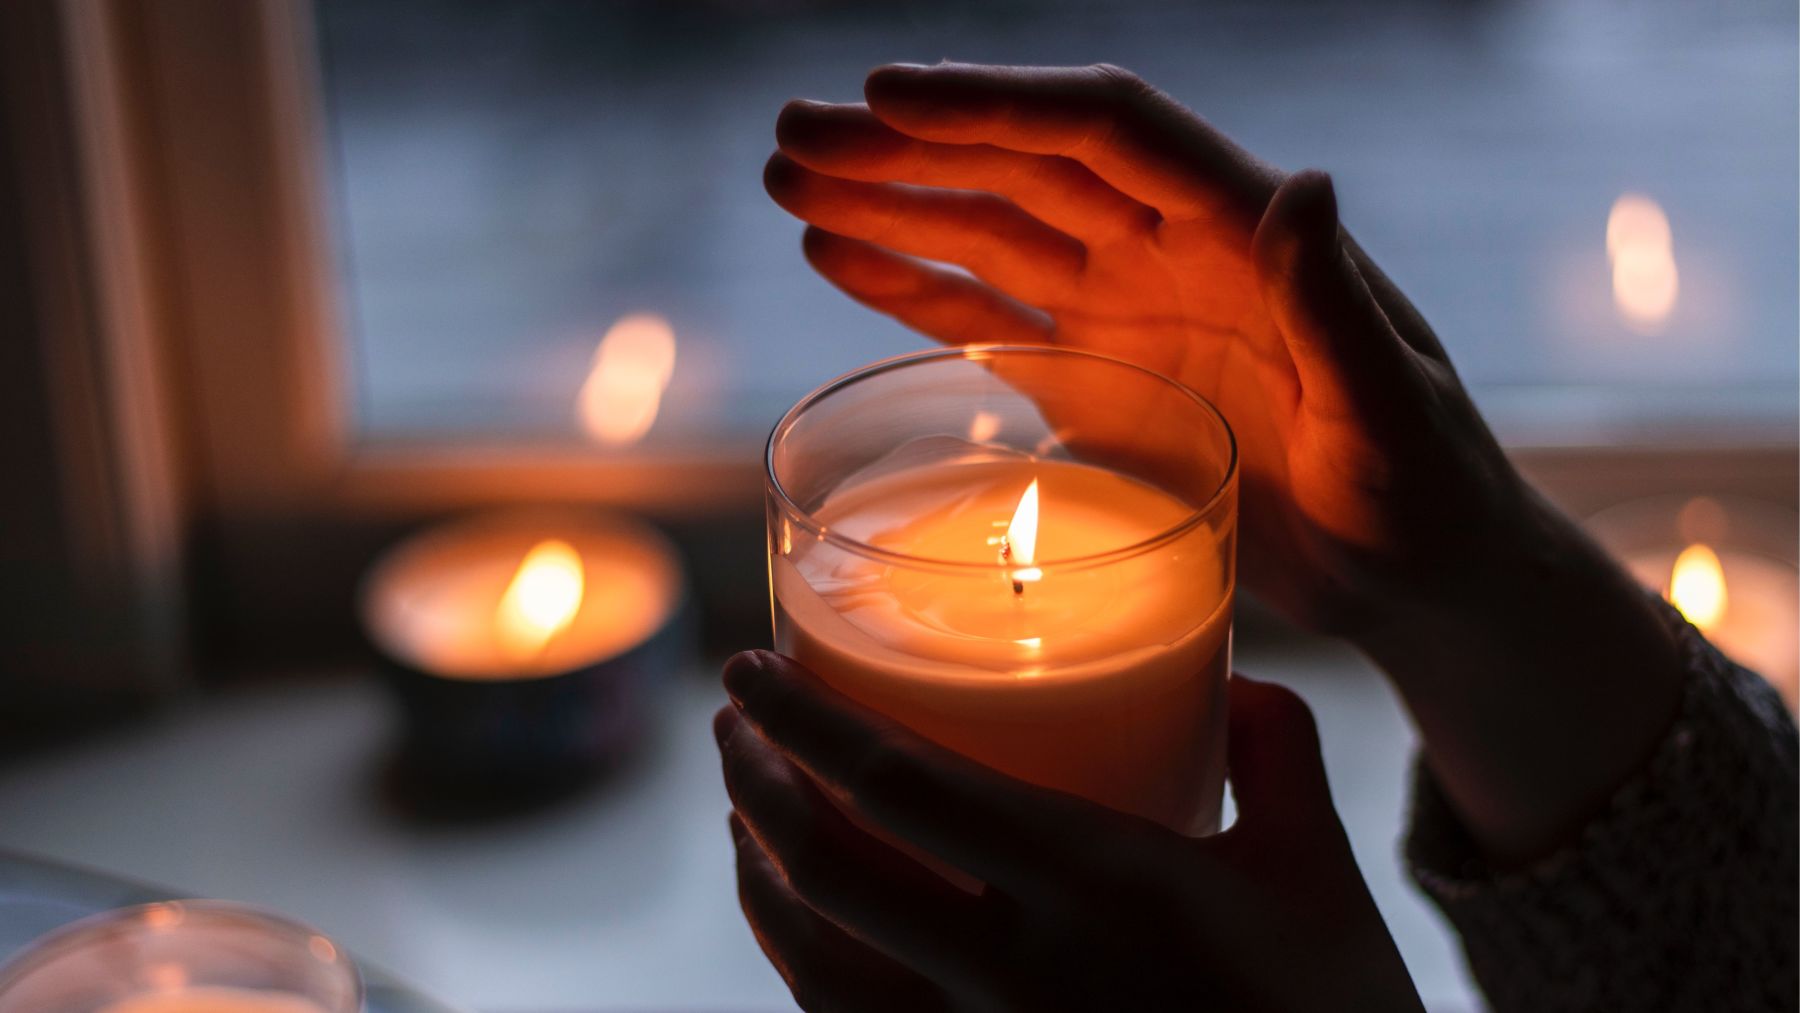 Person holding candle and covering flame.